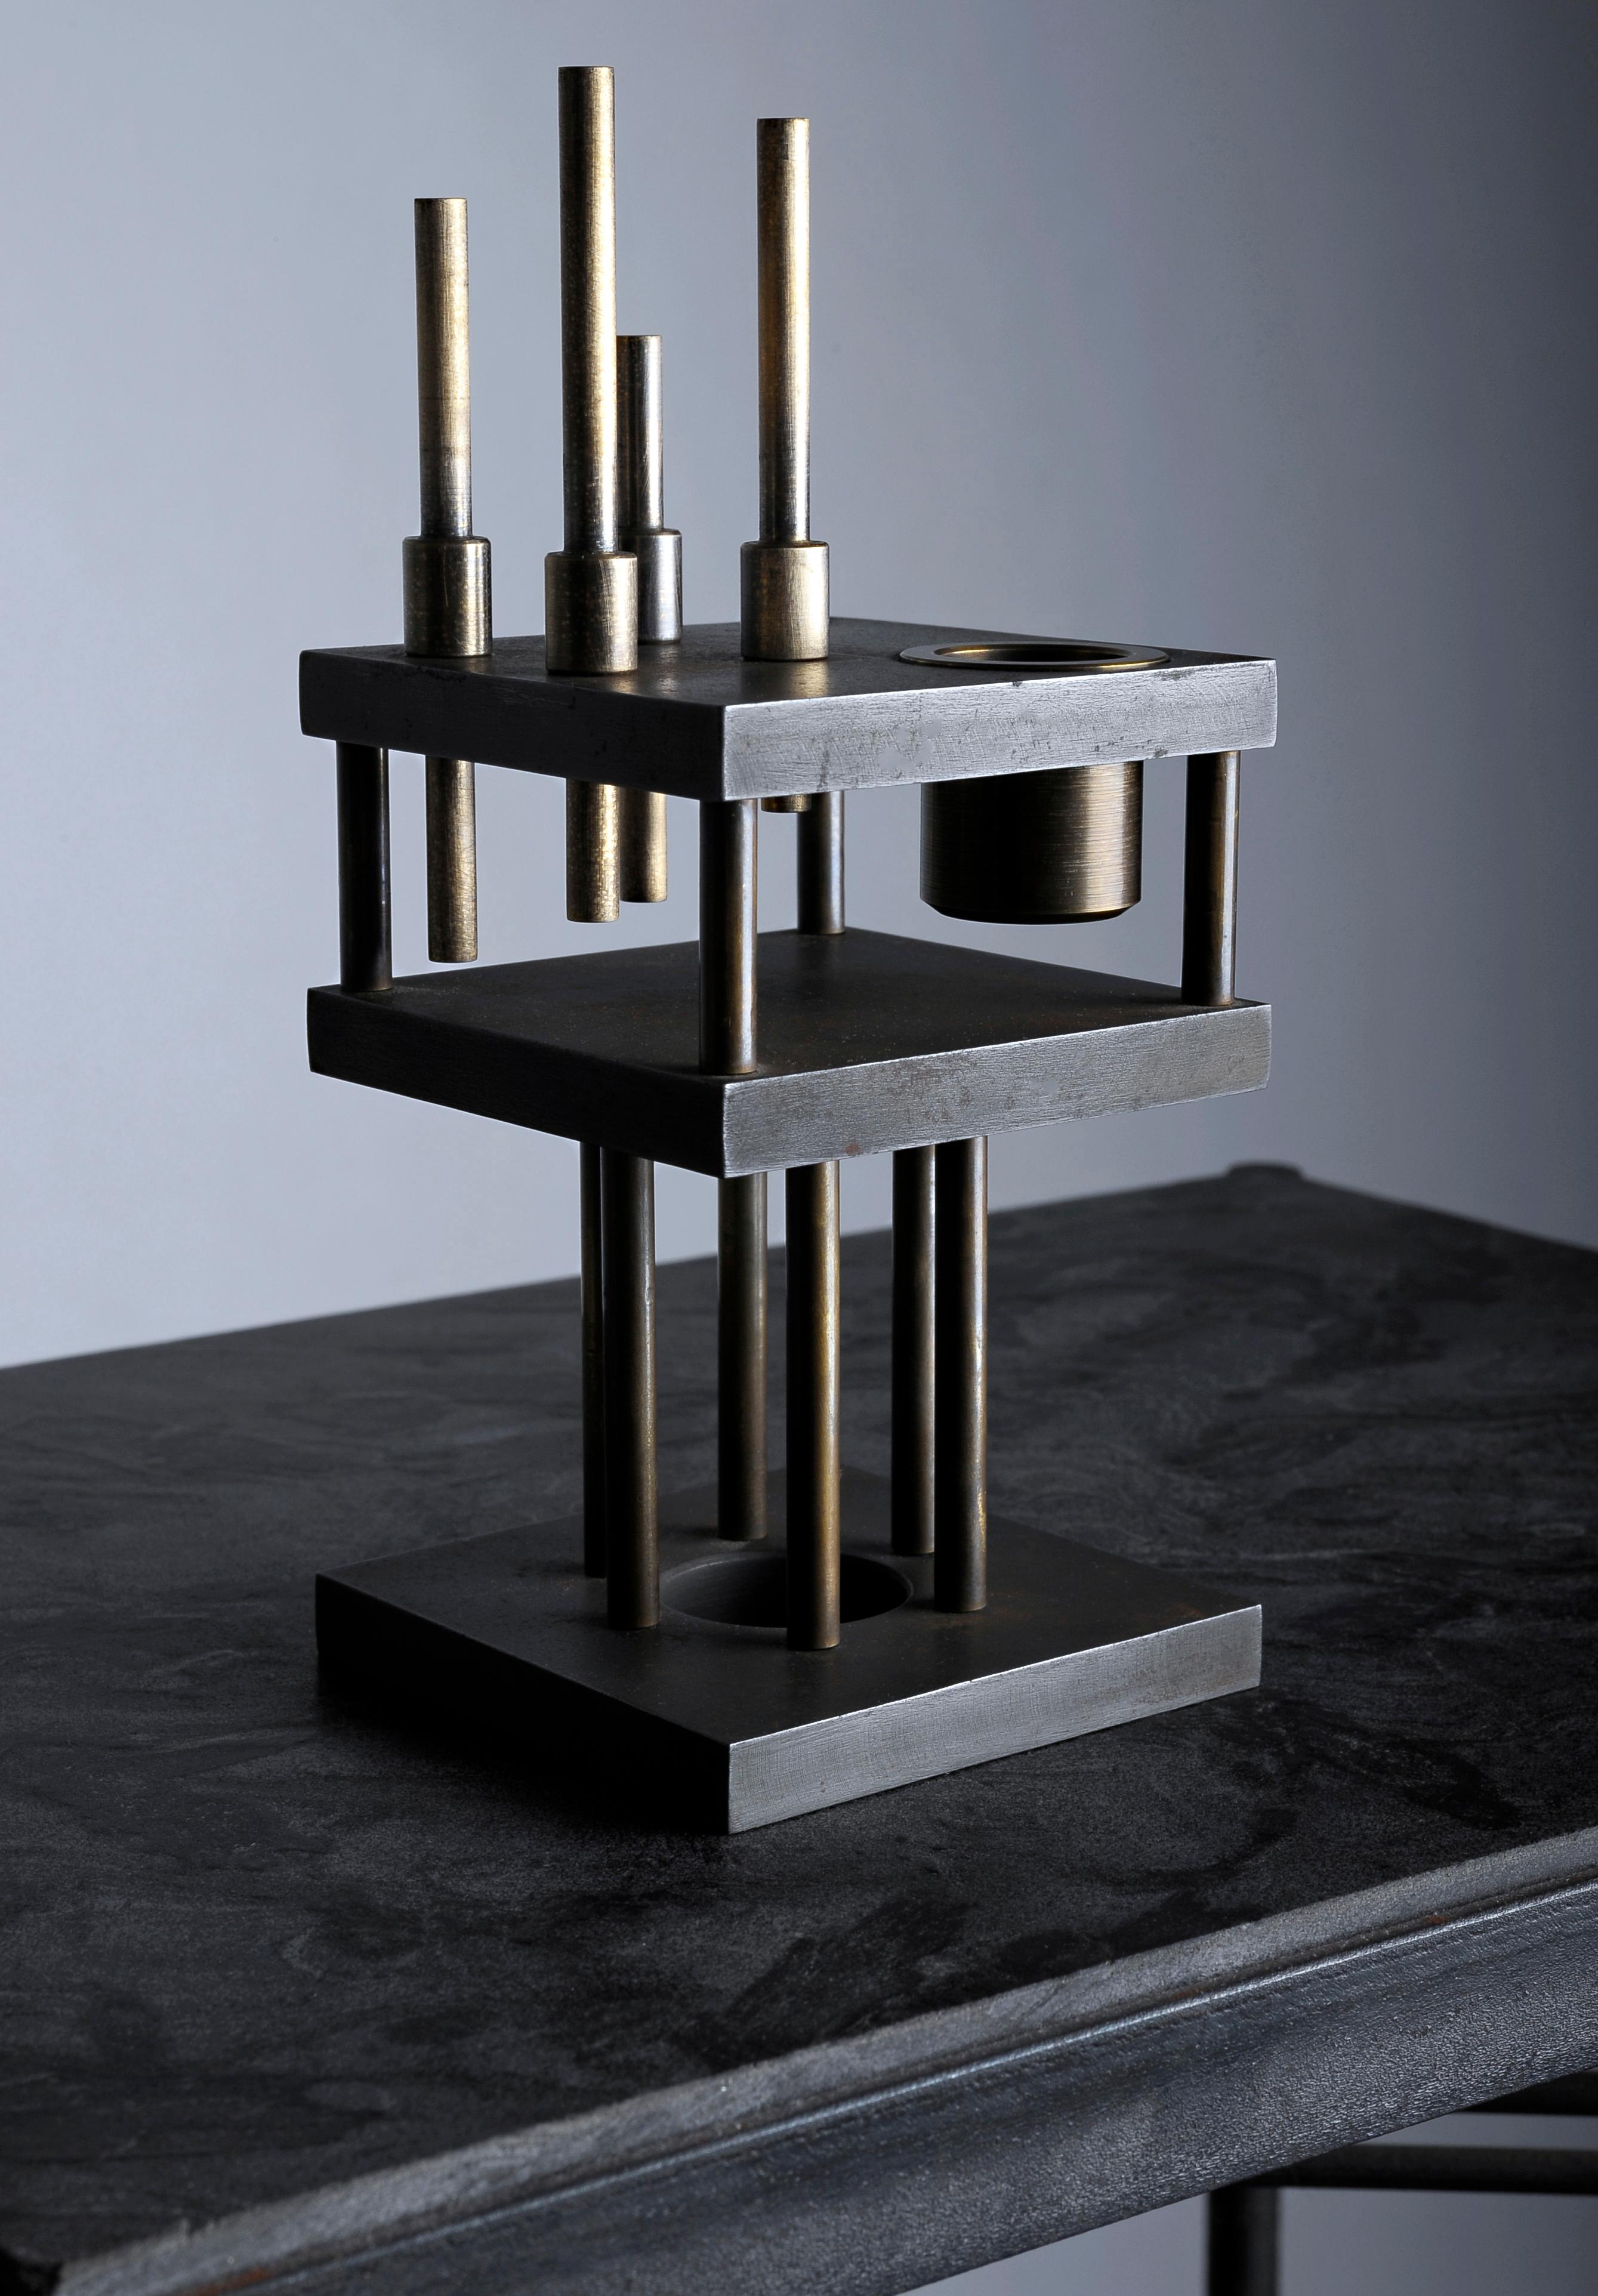 Unique Steel and Brass Candleholder “Brut”, Signed by Lukasz Friedrich.
Steel candleholder “Brut”.
Measures: 8 x 8 H 20 cm.
Finish: Patinated steel with brass details.
Limited Edition of 100.
Signed.